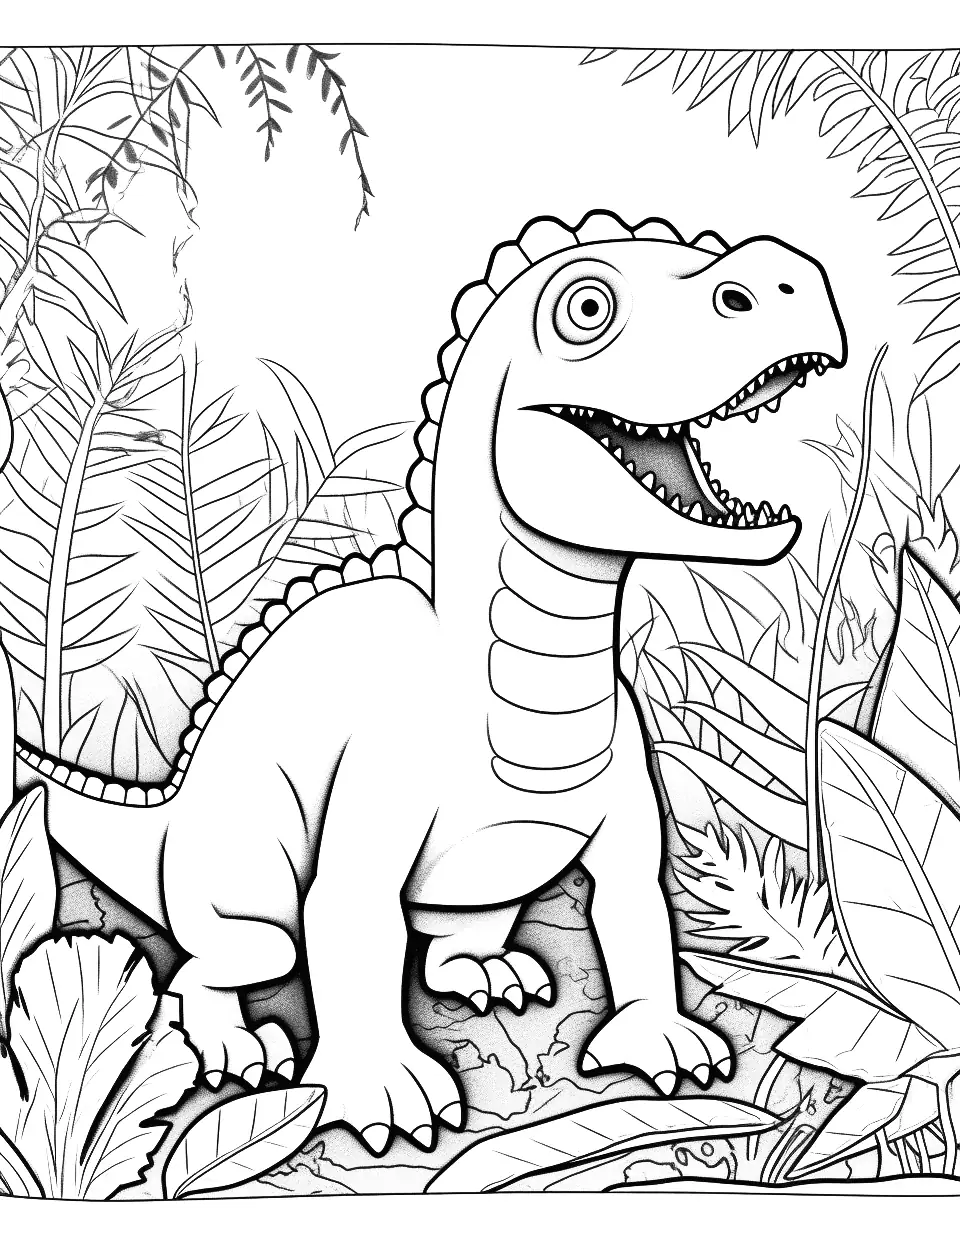 Indoraptor in the Jungle Dinosaur Coloring Page - A menacing scene with the Indoraptor lurking in the jungle.